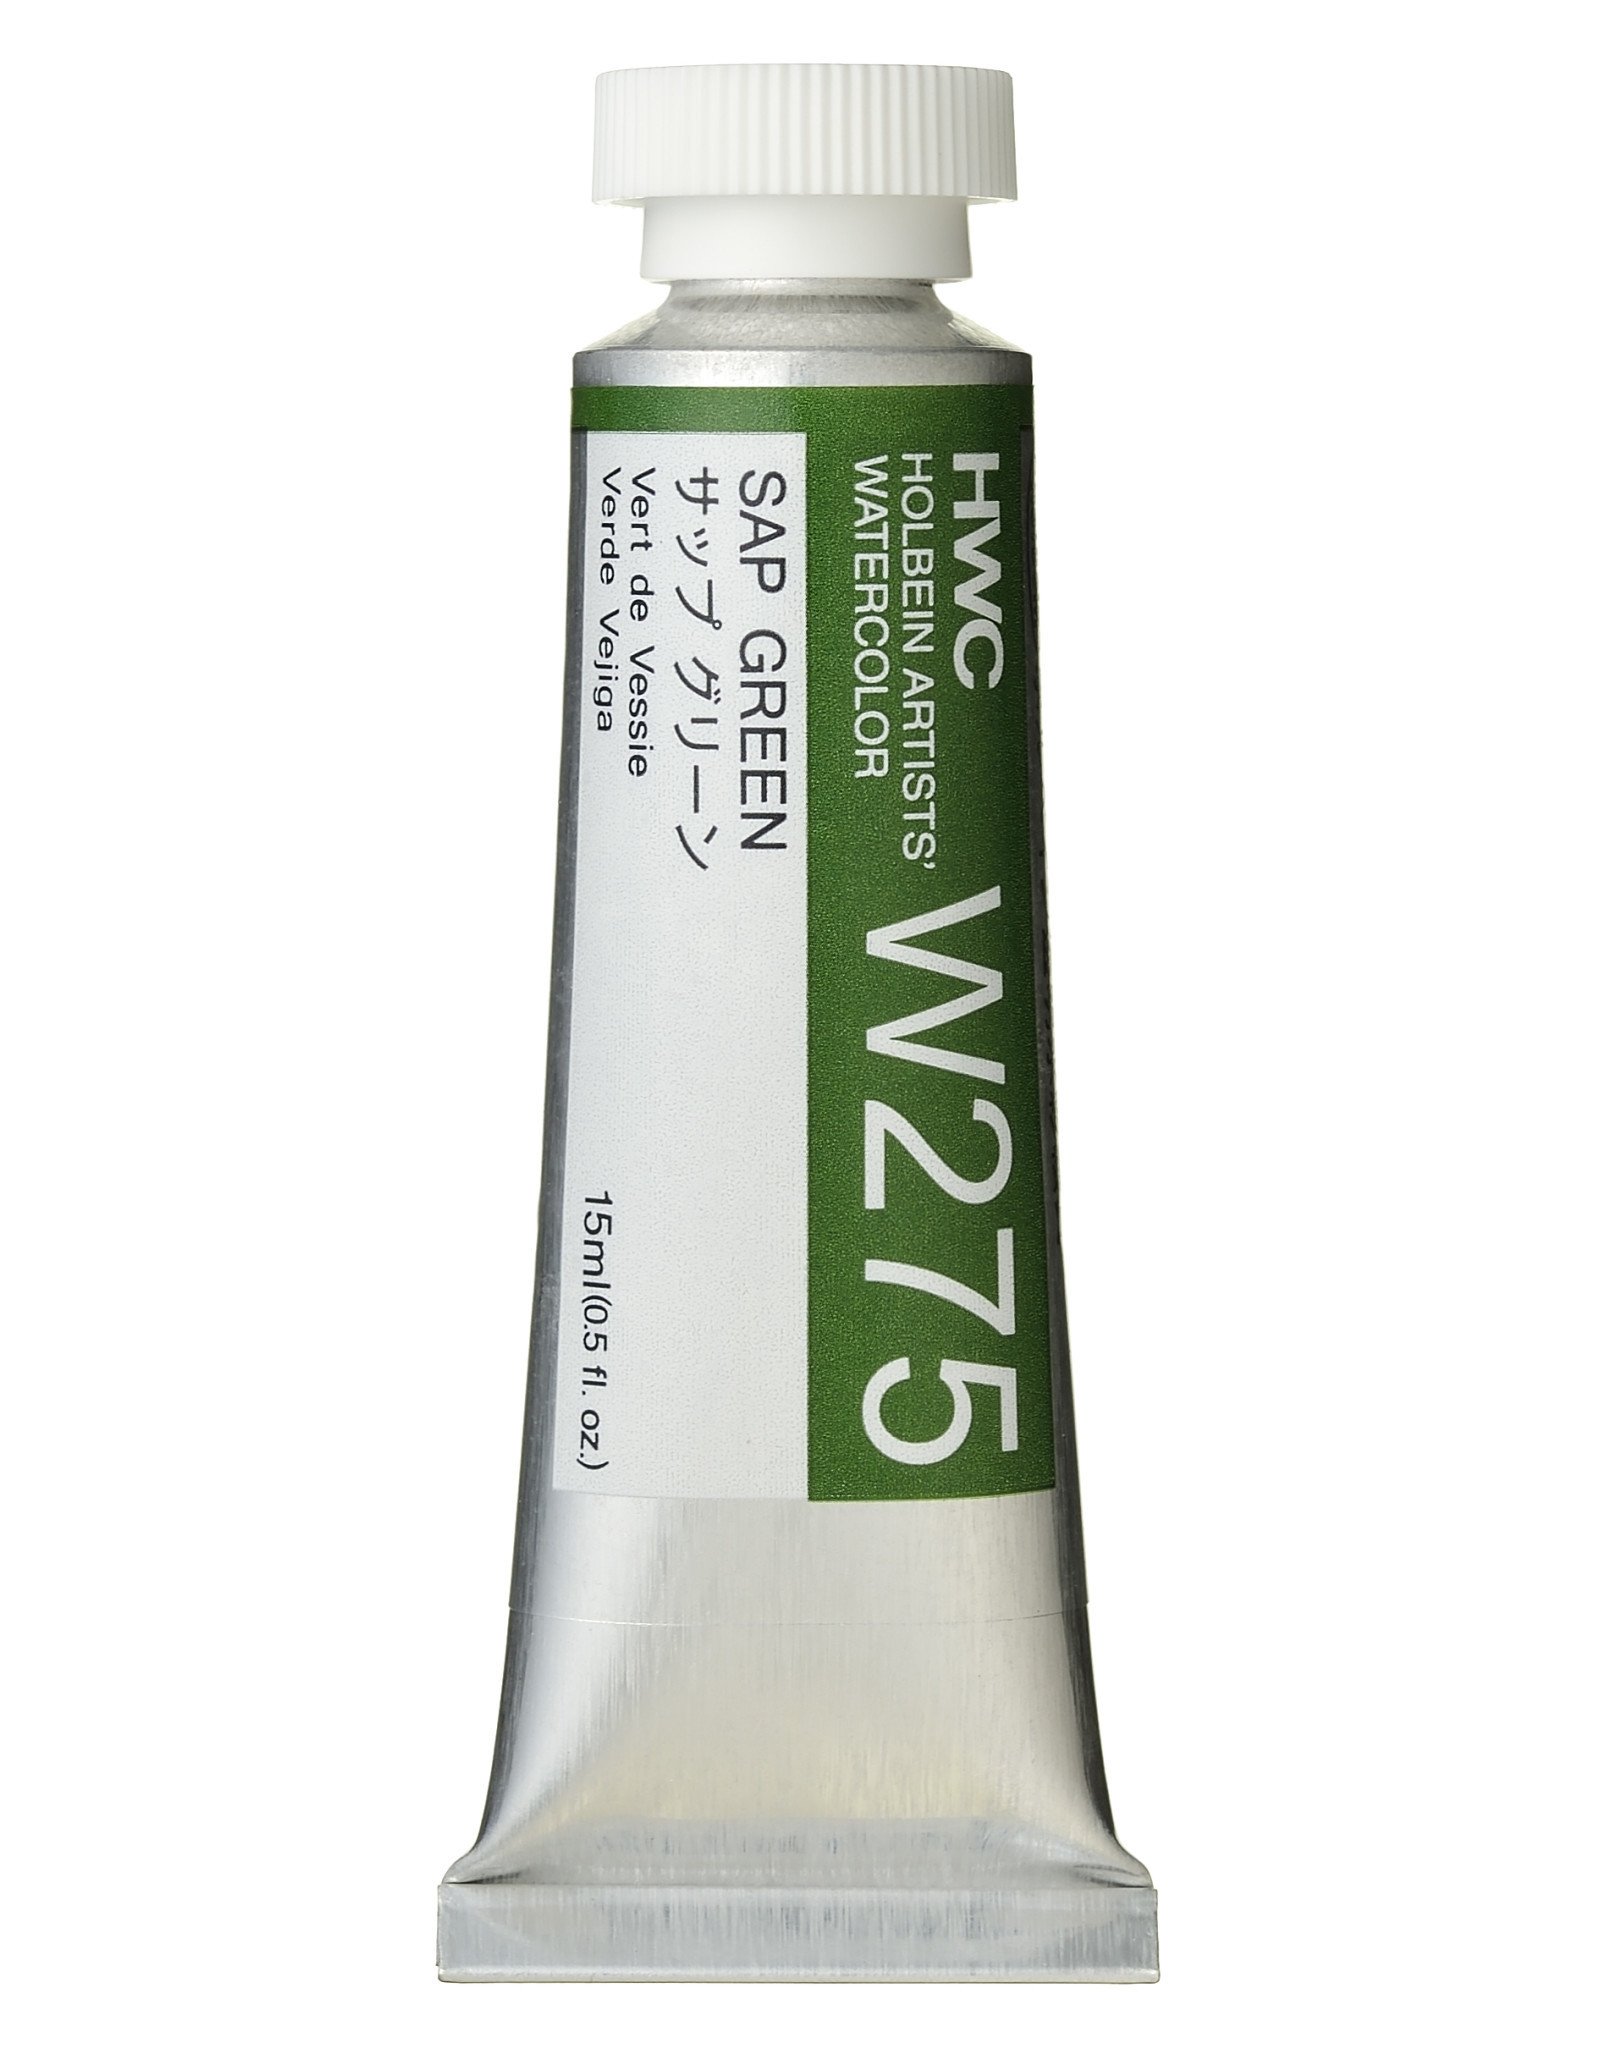 HOLBEIN Holbein Artist’s Watercolor, Sap Green 15ml